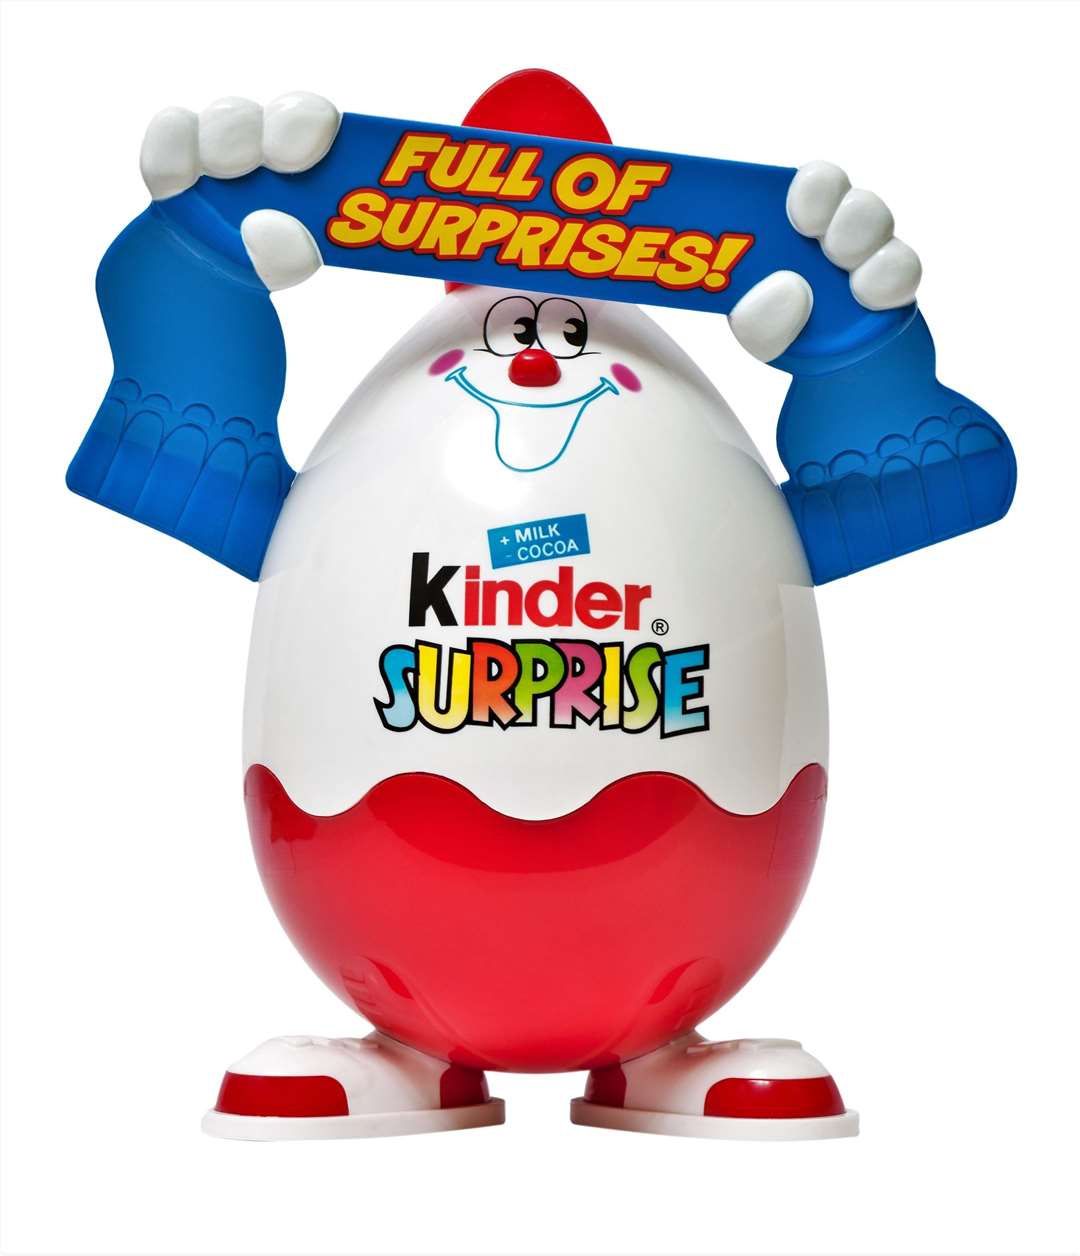 The Kinder Surprise 20g and Kinder Surprise 20g x 3 with specific sell by dates are being 'voluntarily recalled as a precautionary step' due to a possible link with a number of reported cases of salmonella.